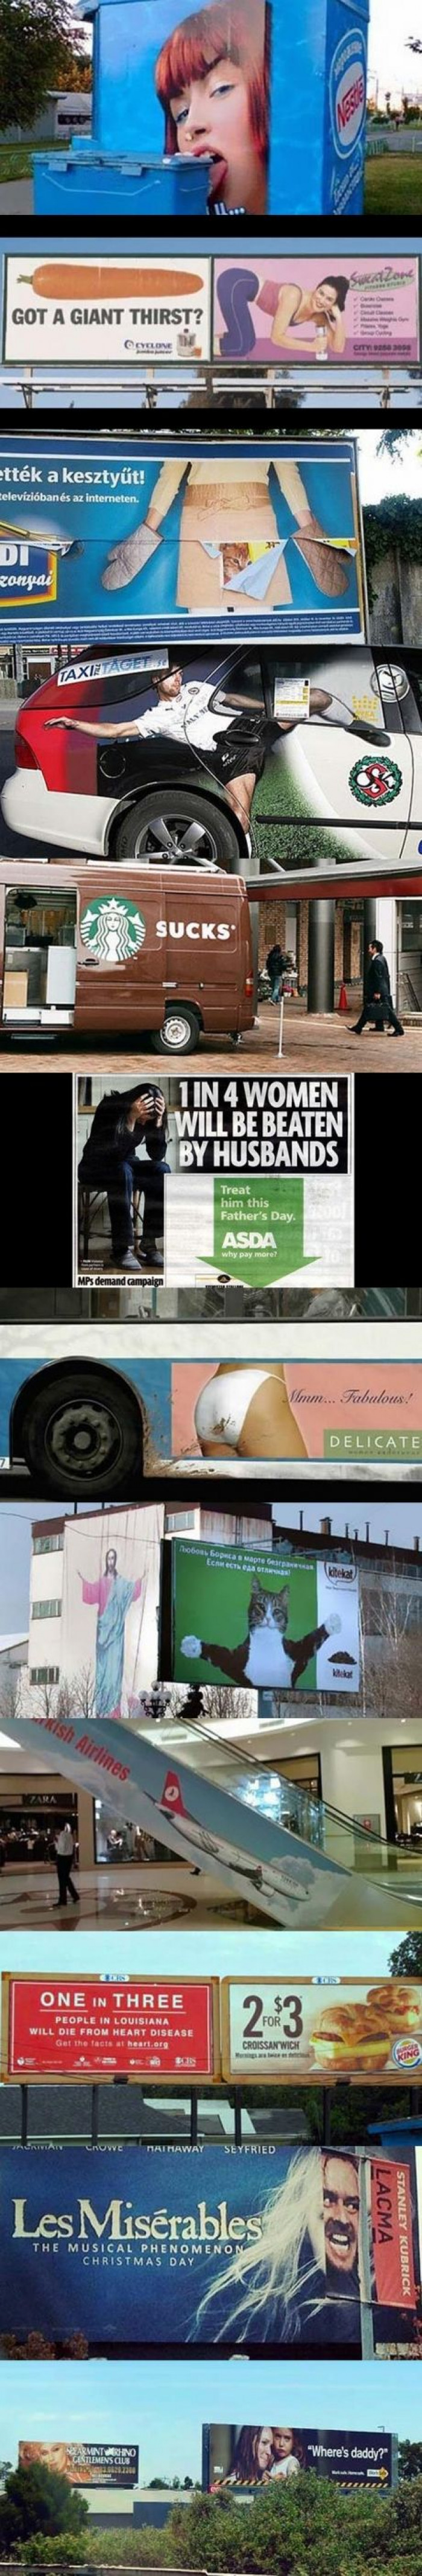 Awkward Ad Placements